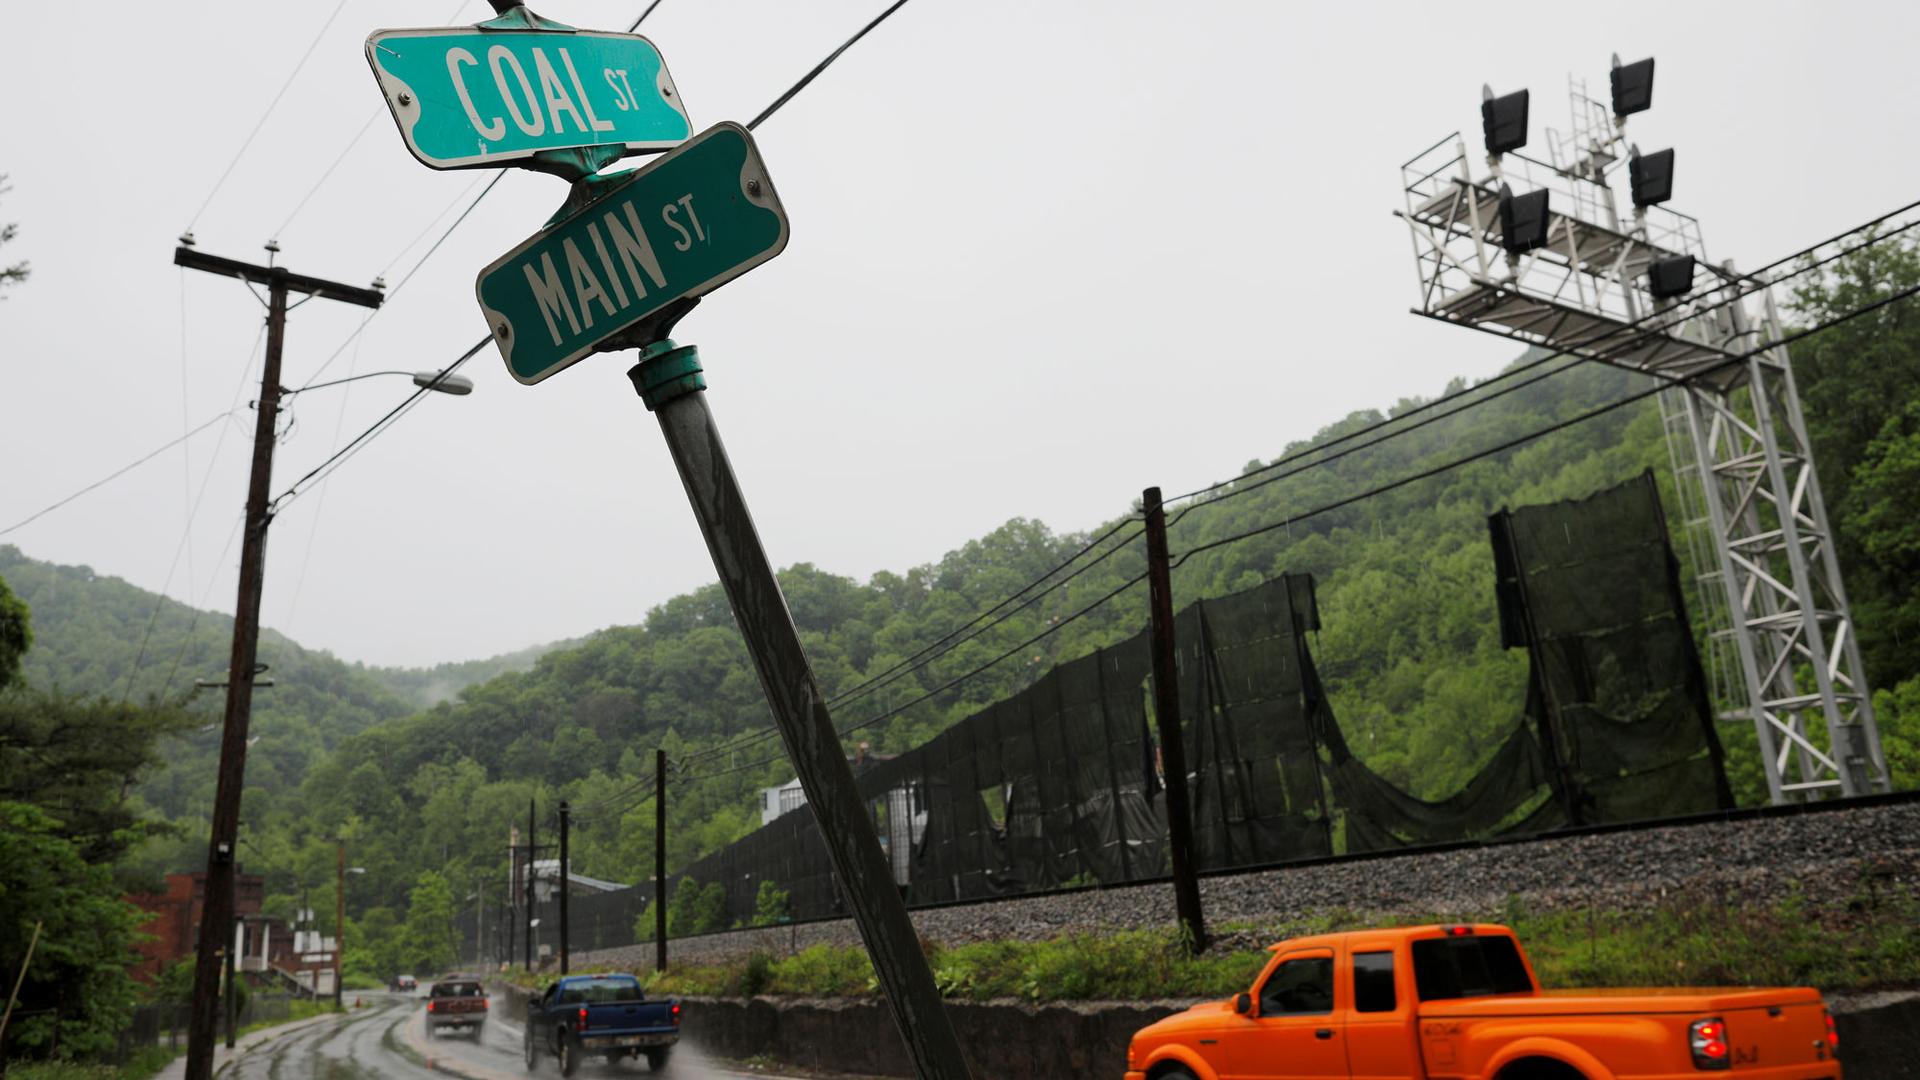 Three pick-up trucks drive down a wet road passing a street sign indicating the intersection of Coal Street and Main Street in Keystone, West Virginia, 2018.